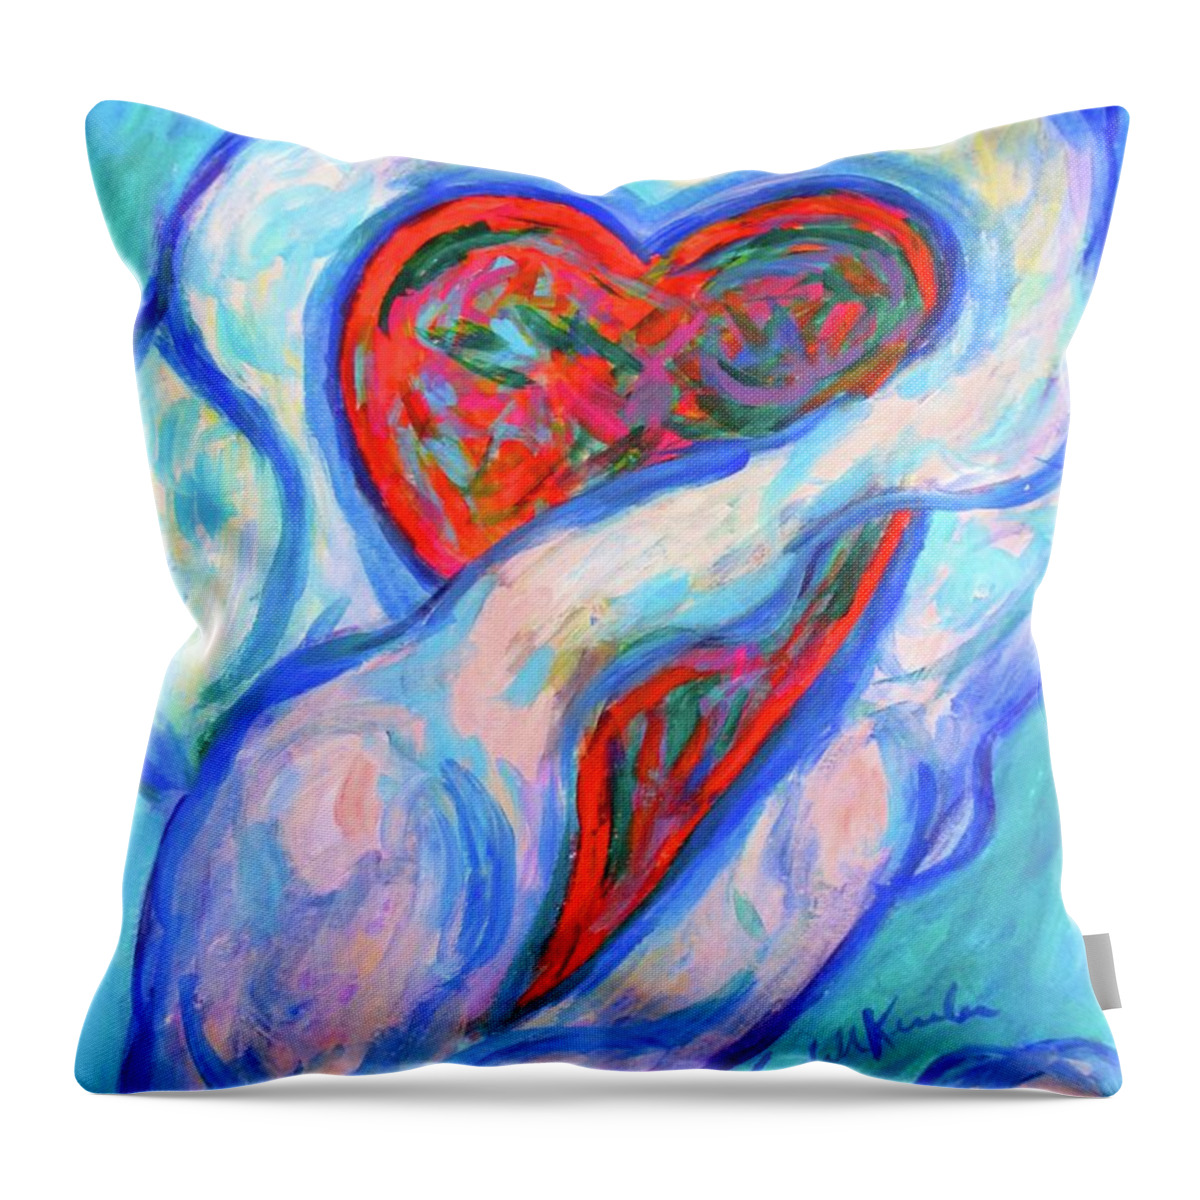 Cloud Prints For Sale Throw Pillow featuring the painting Heart Cloud by Kendall Kessler